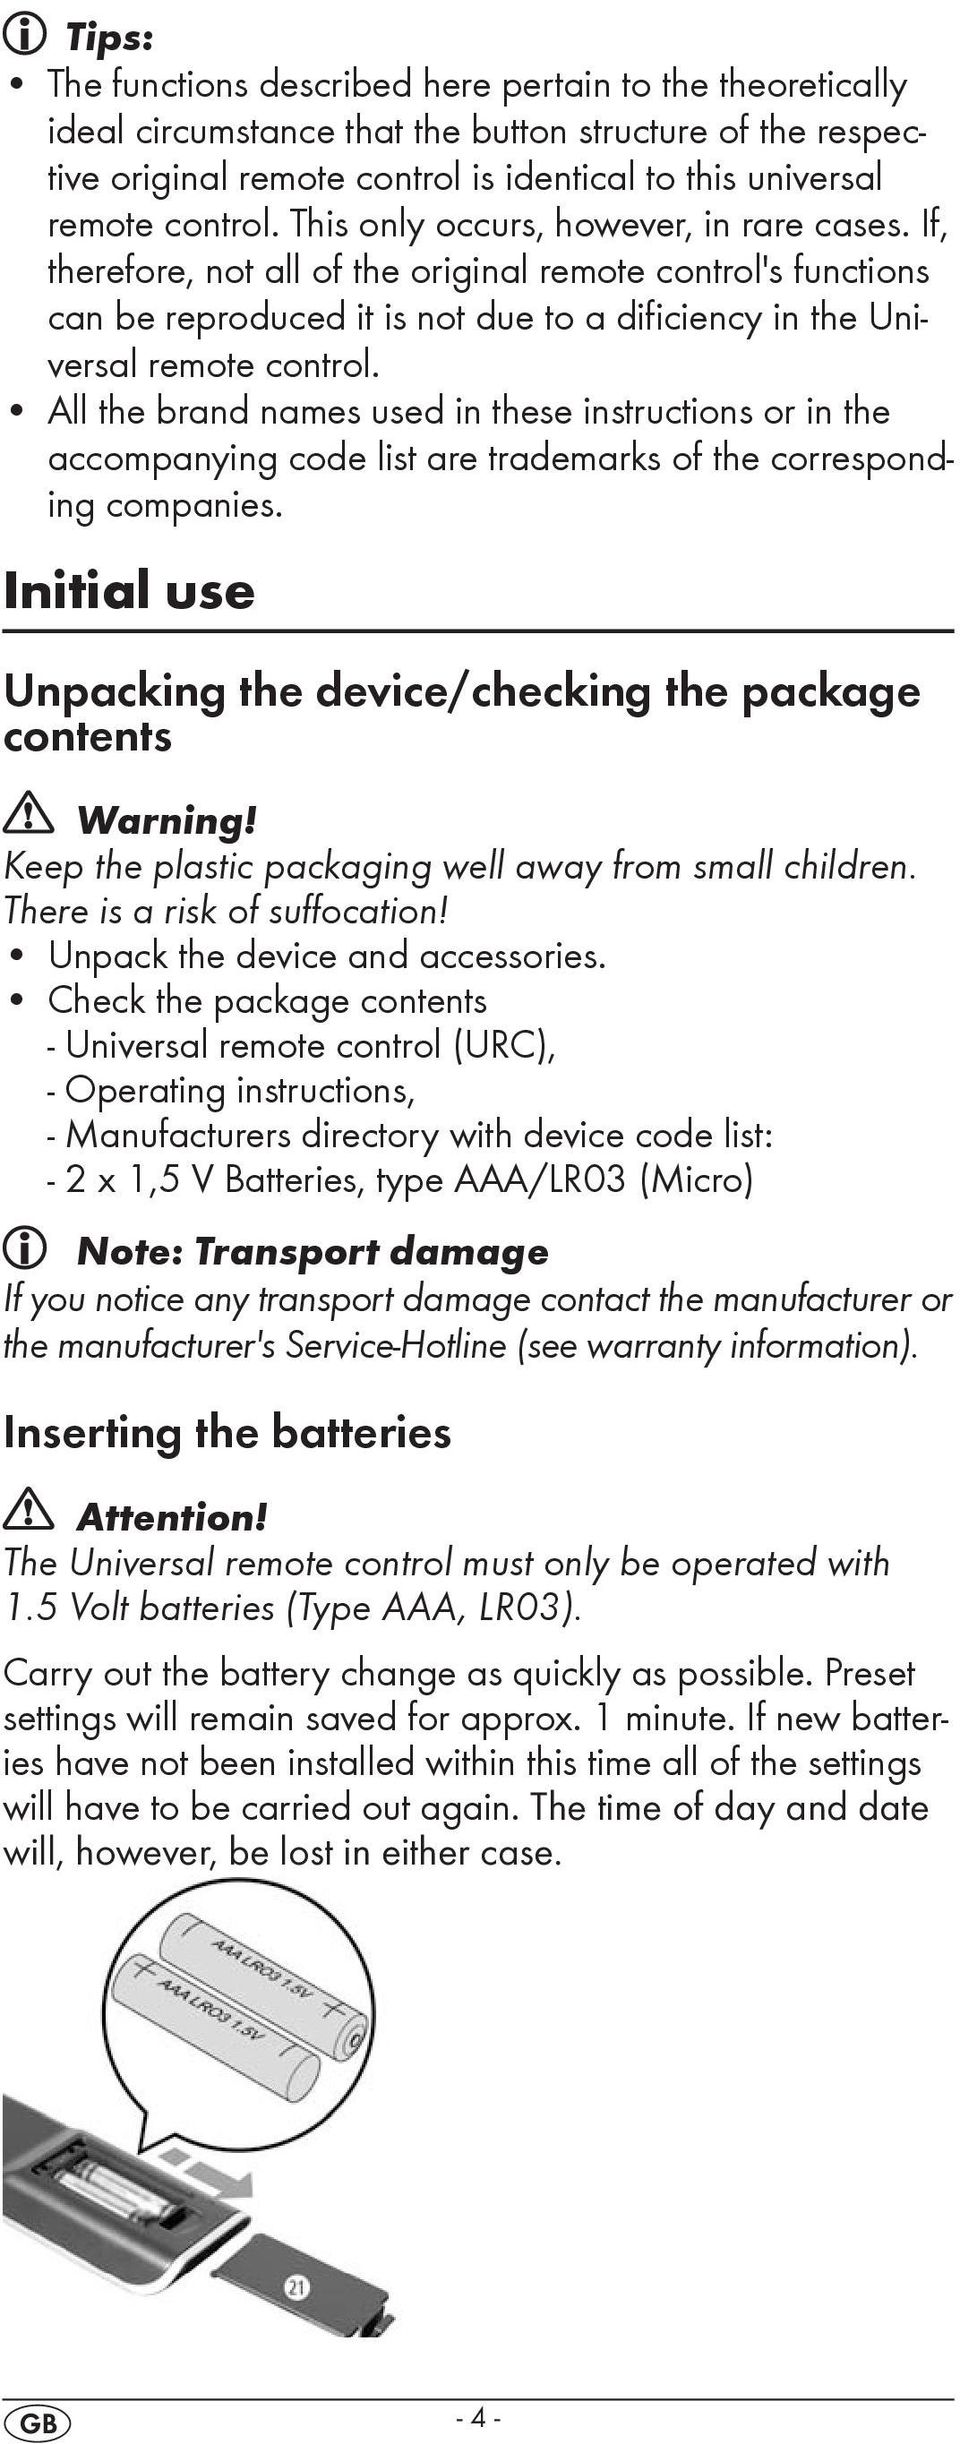 All the brand names used in these instructions or in the accompanying code list are trademarks of the corresponding companies. Initial use Unpacking the device/checking the package contents Warning!